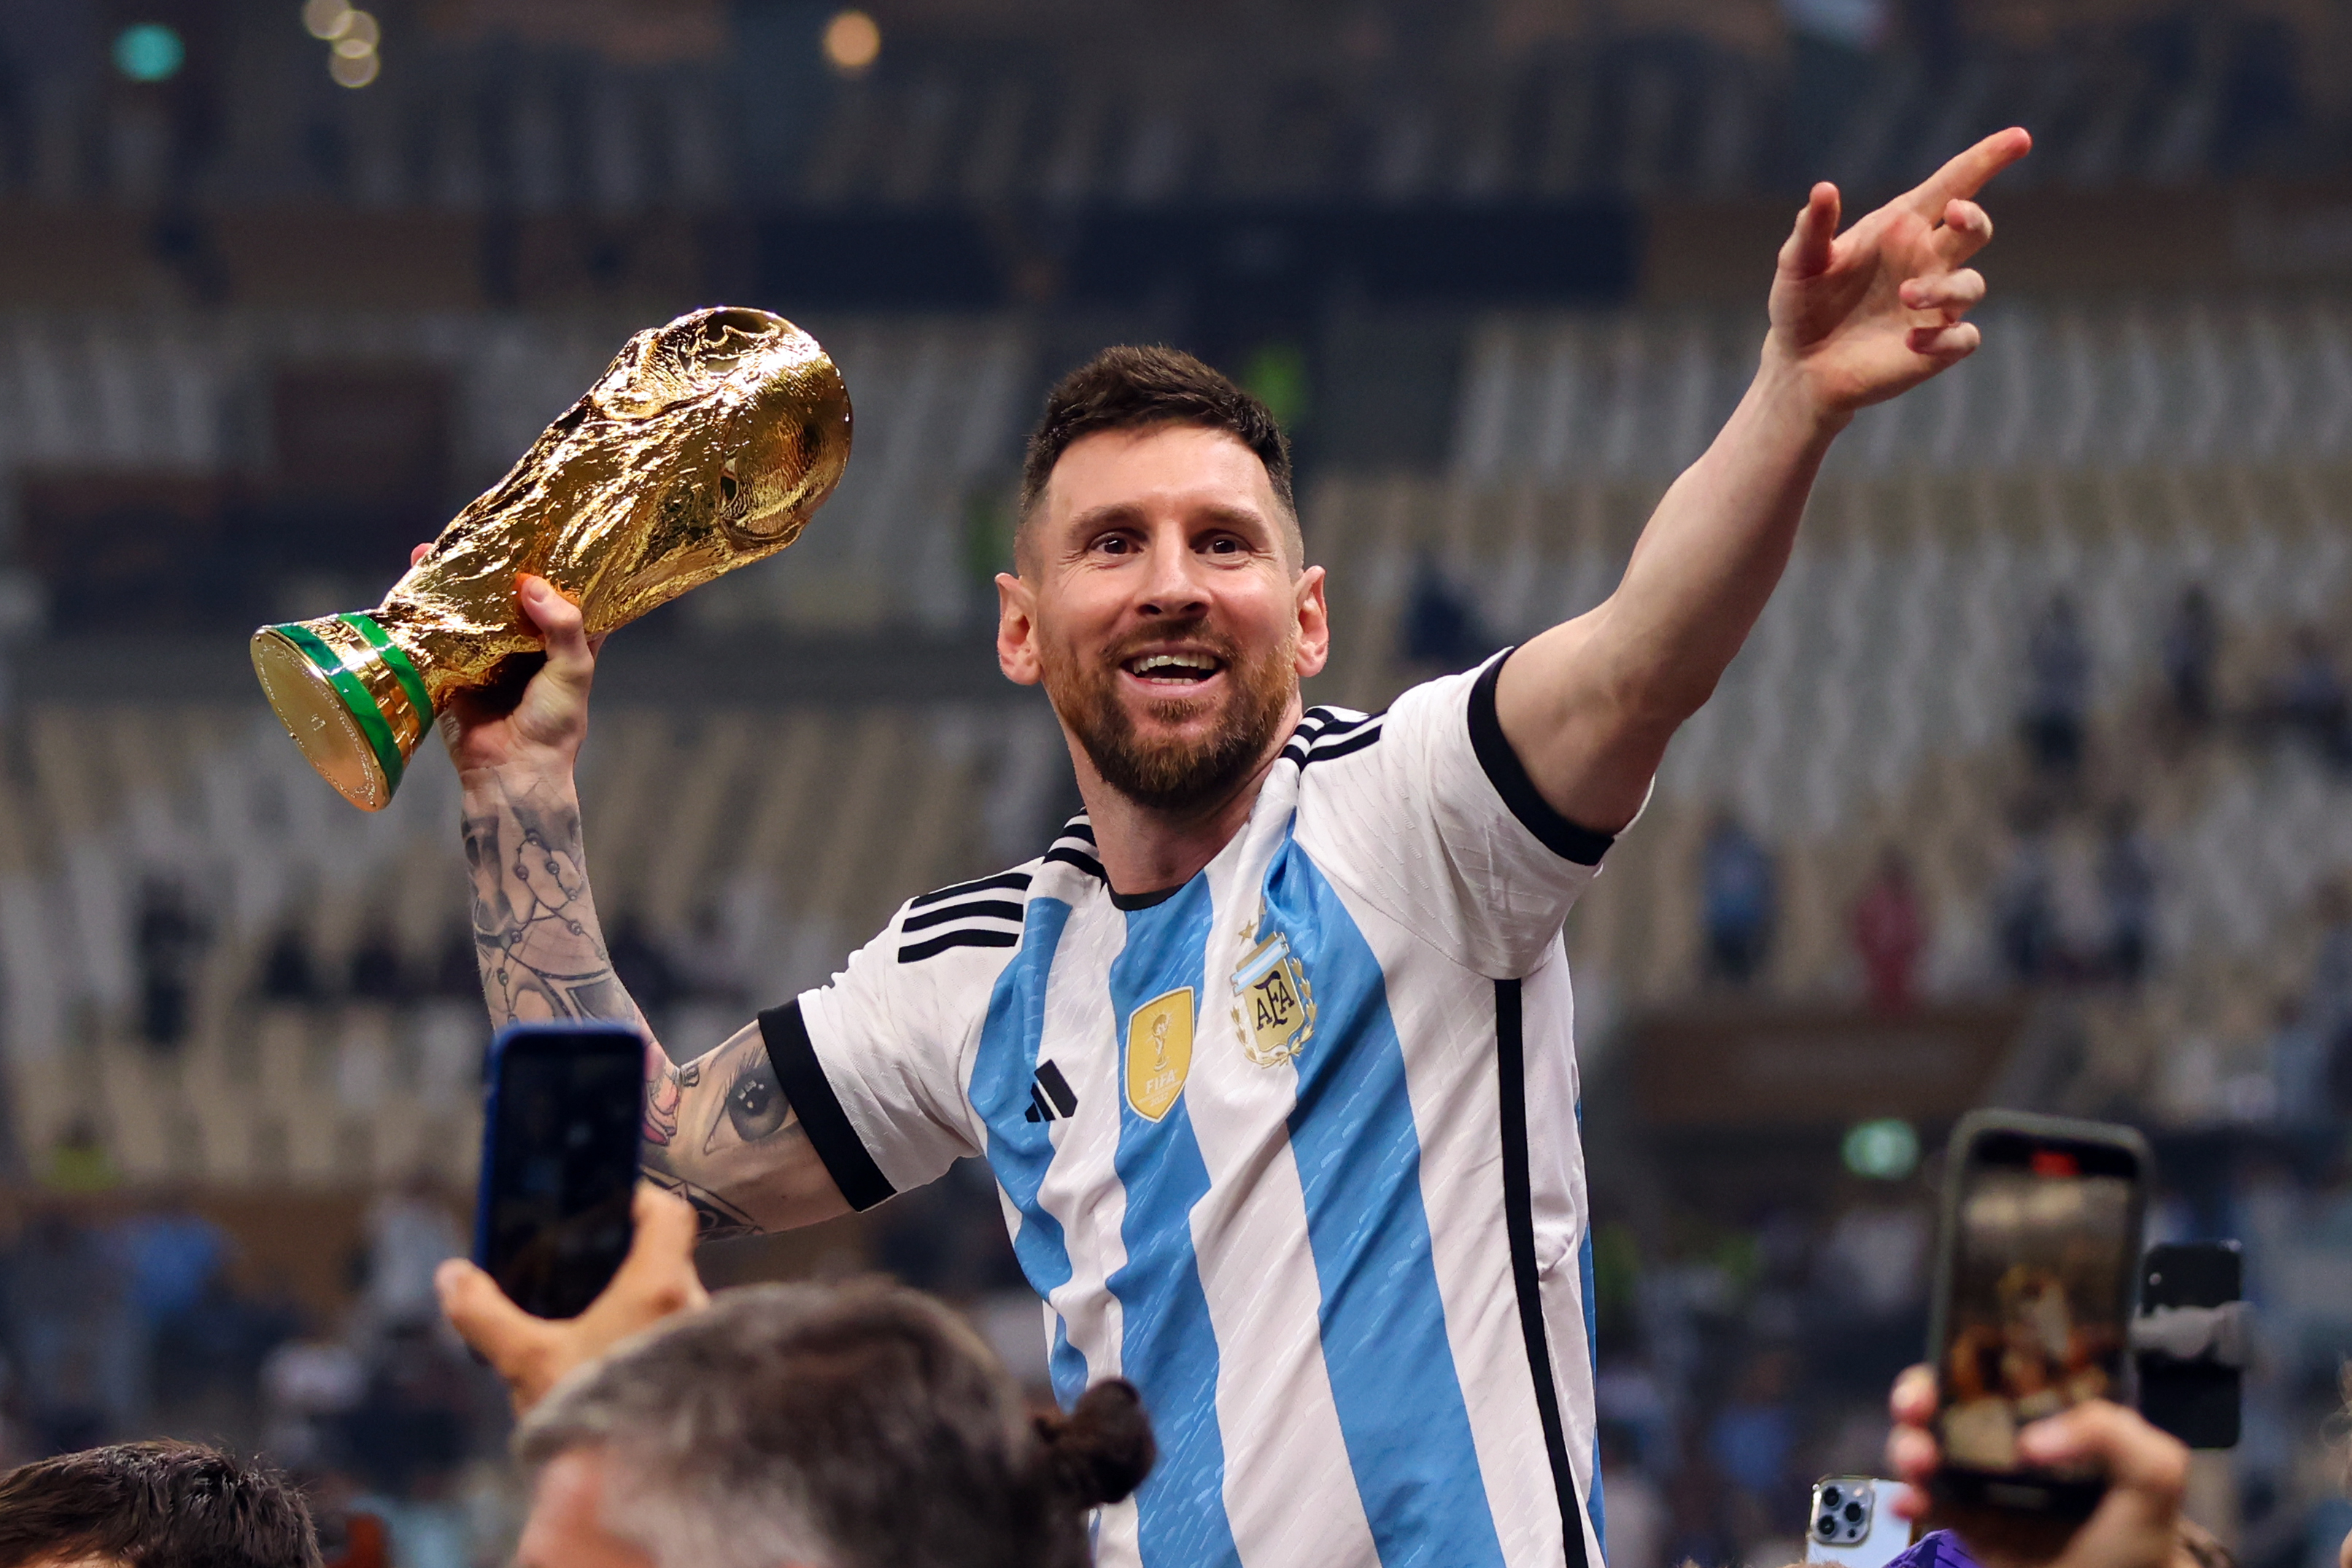 WATCH: 'Messi's World Cup: The Rise of a Legend' trailer & release